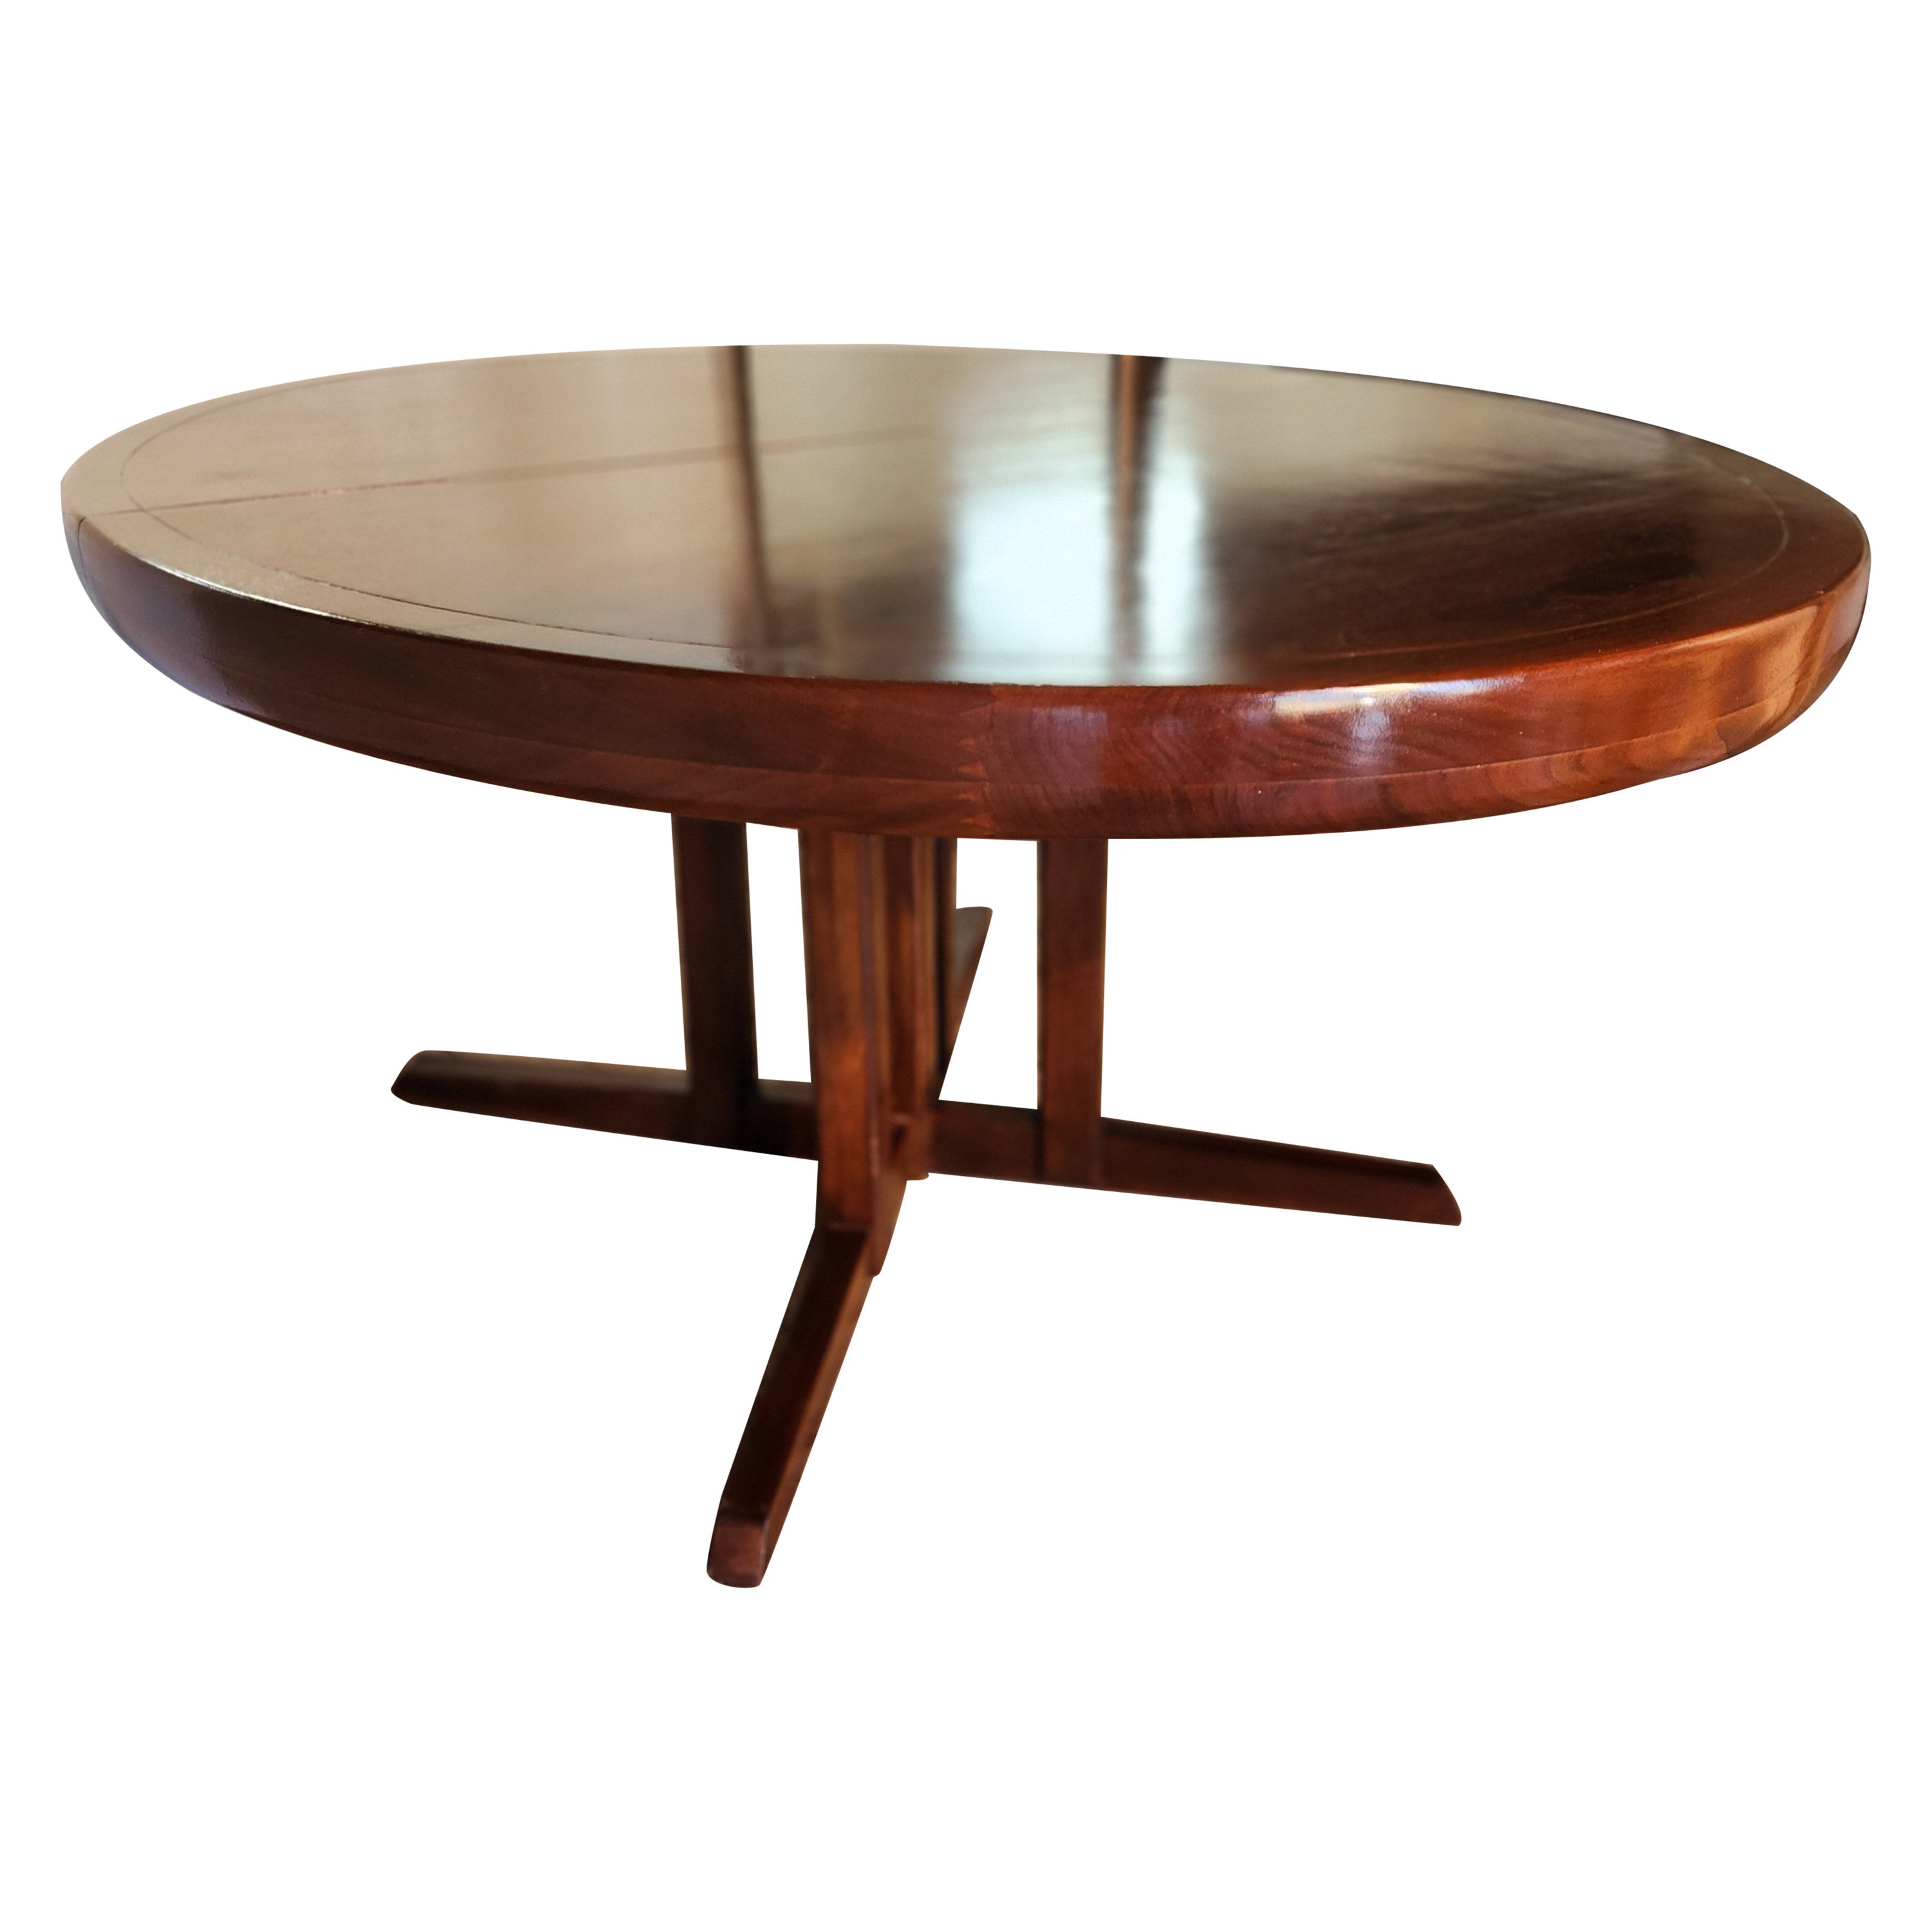 An extendable walnut dining table by George Nakashima for Widdicomb Furniture Company from 1959.
A line of bookmatched veneers encased by a 3 inch deep carved and finger joined solid walnut edge gives the top of the table an interesting contrast.